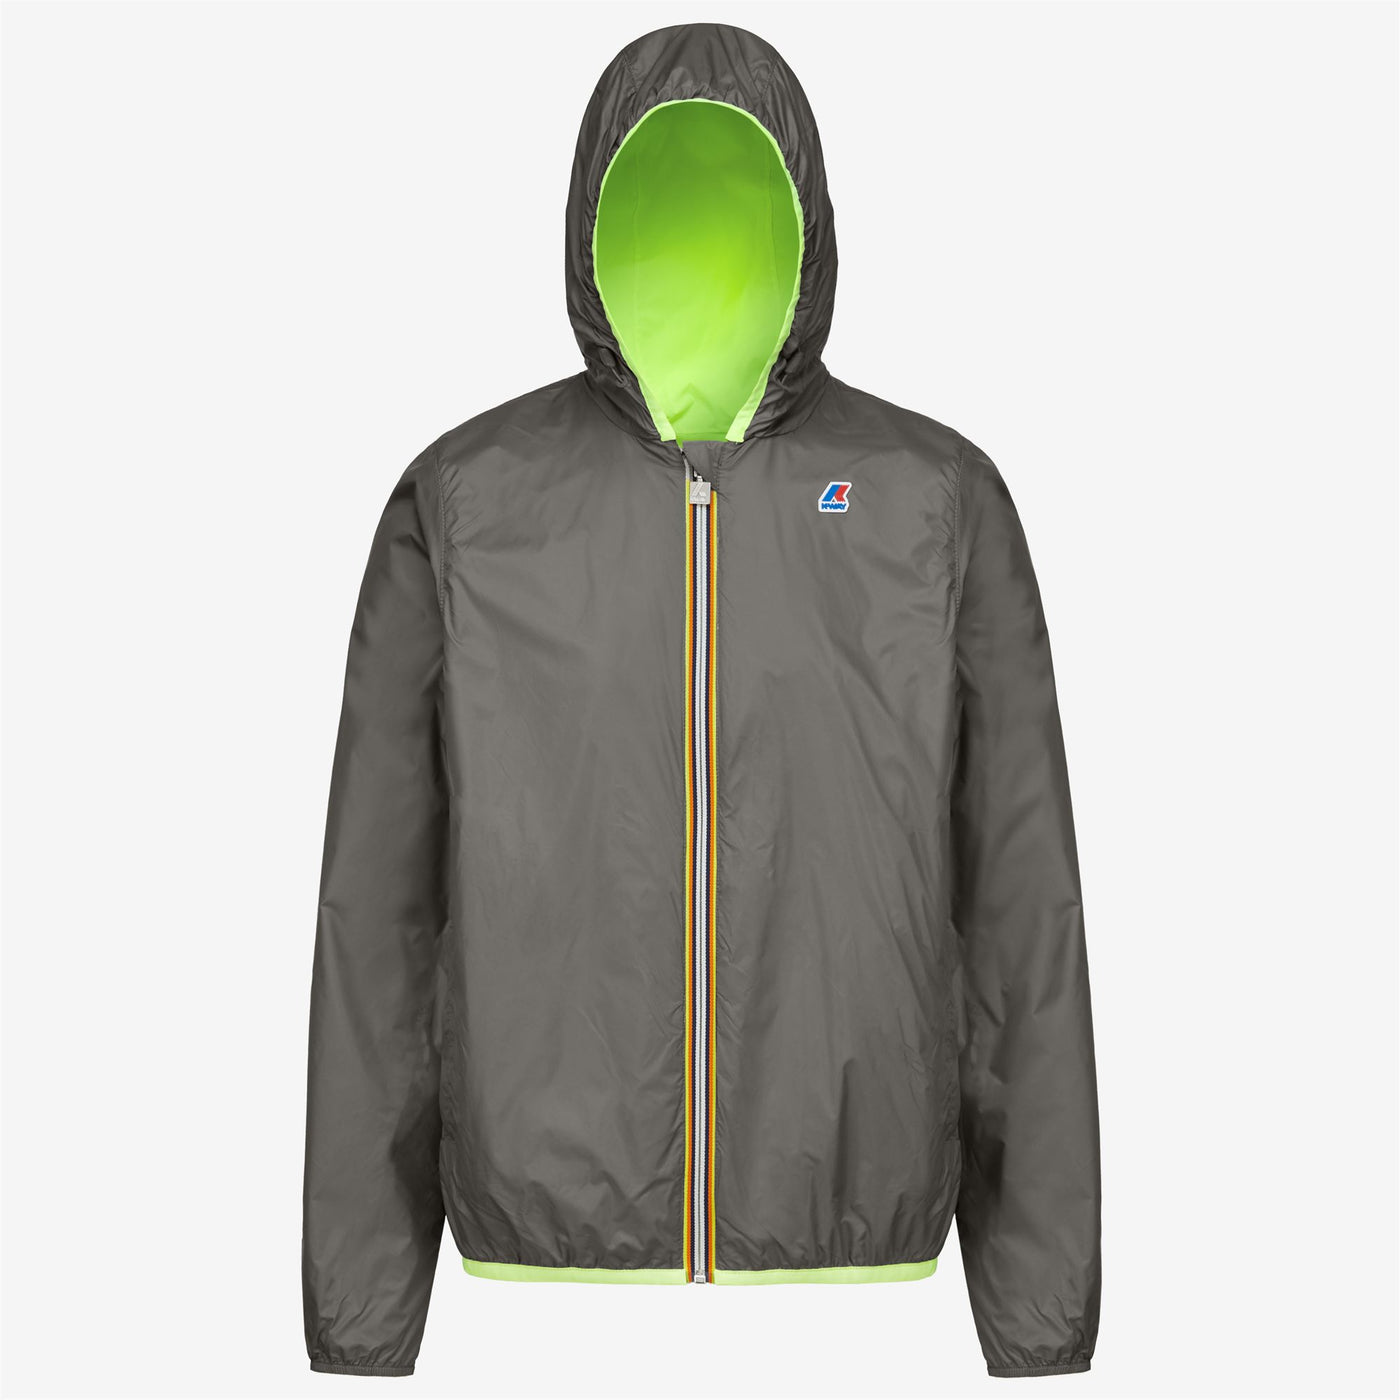 Jackets Man Jacques Plus Double Fluo Short YELLOW FLUO-GREY Dressed Front (jpg Rgb)	